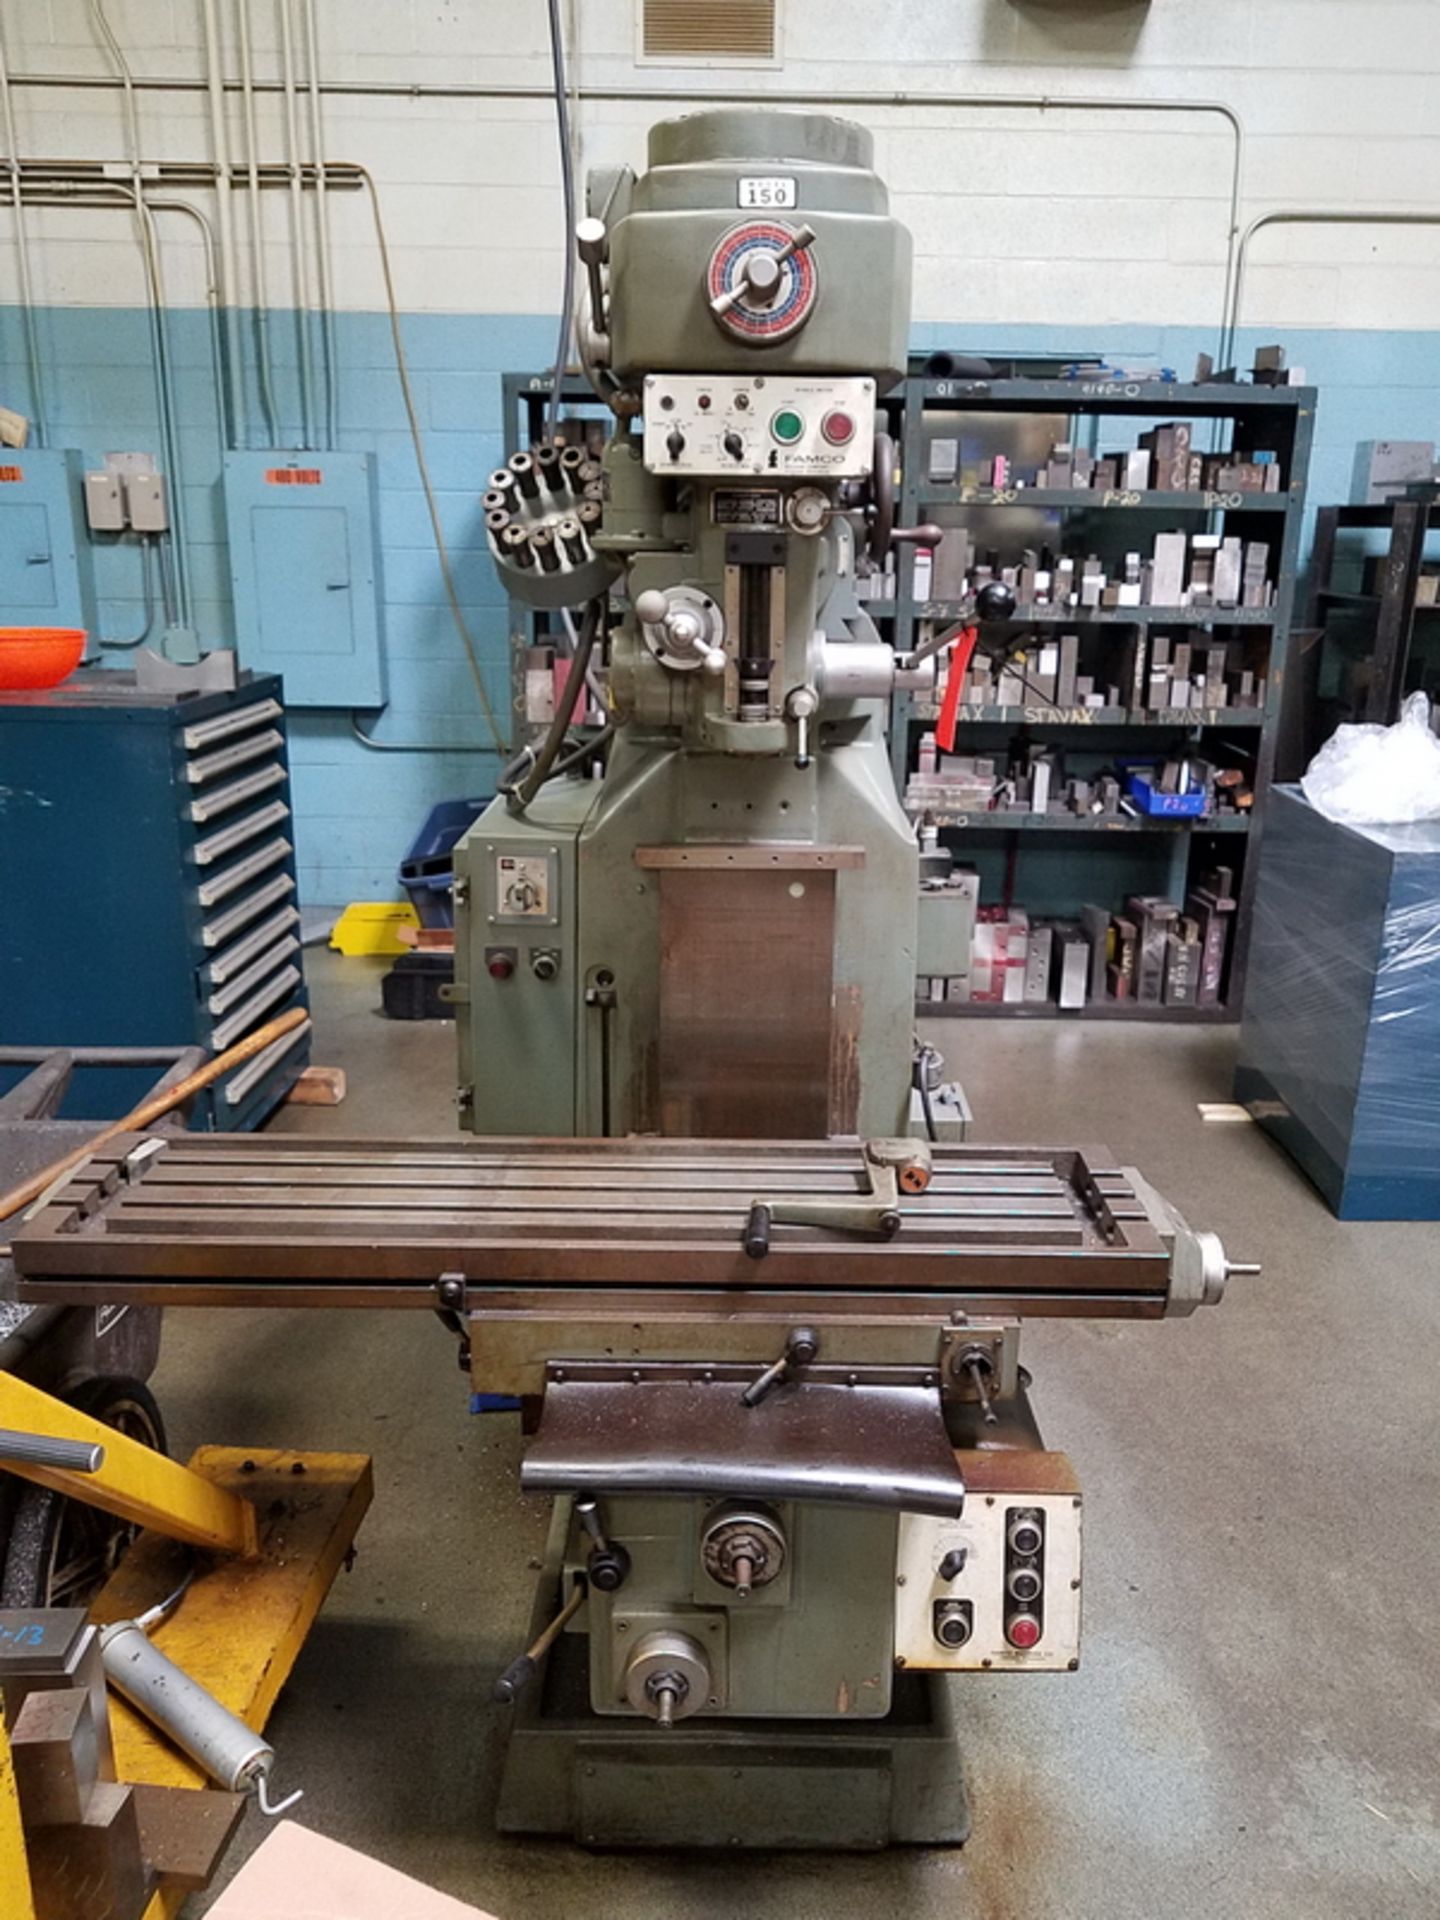 Famco 3-HP Model 150 Vertical Milling Machine, S/N: M-271450; with Rapid Feed, R-8 Spindle, 4.5